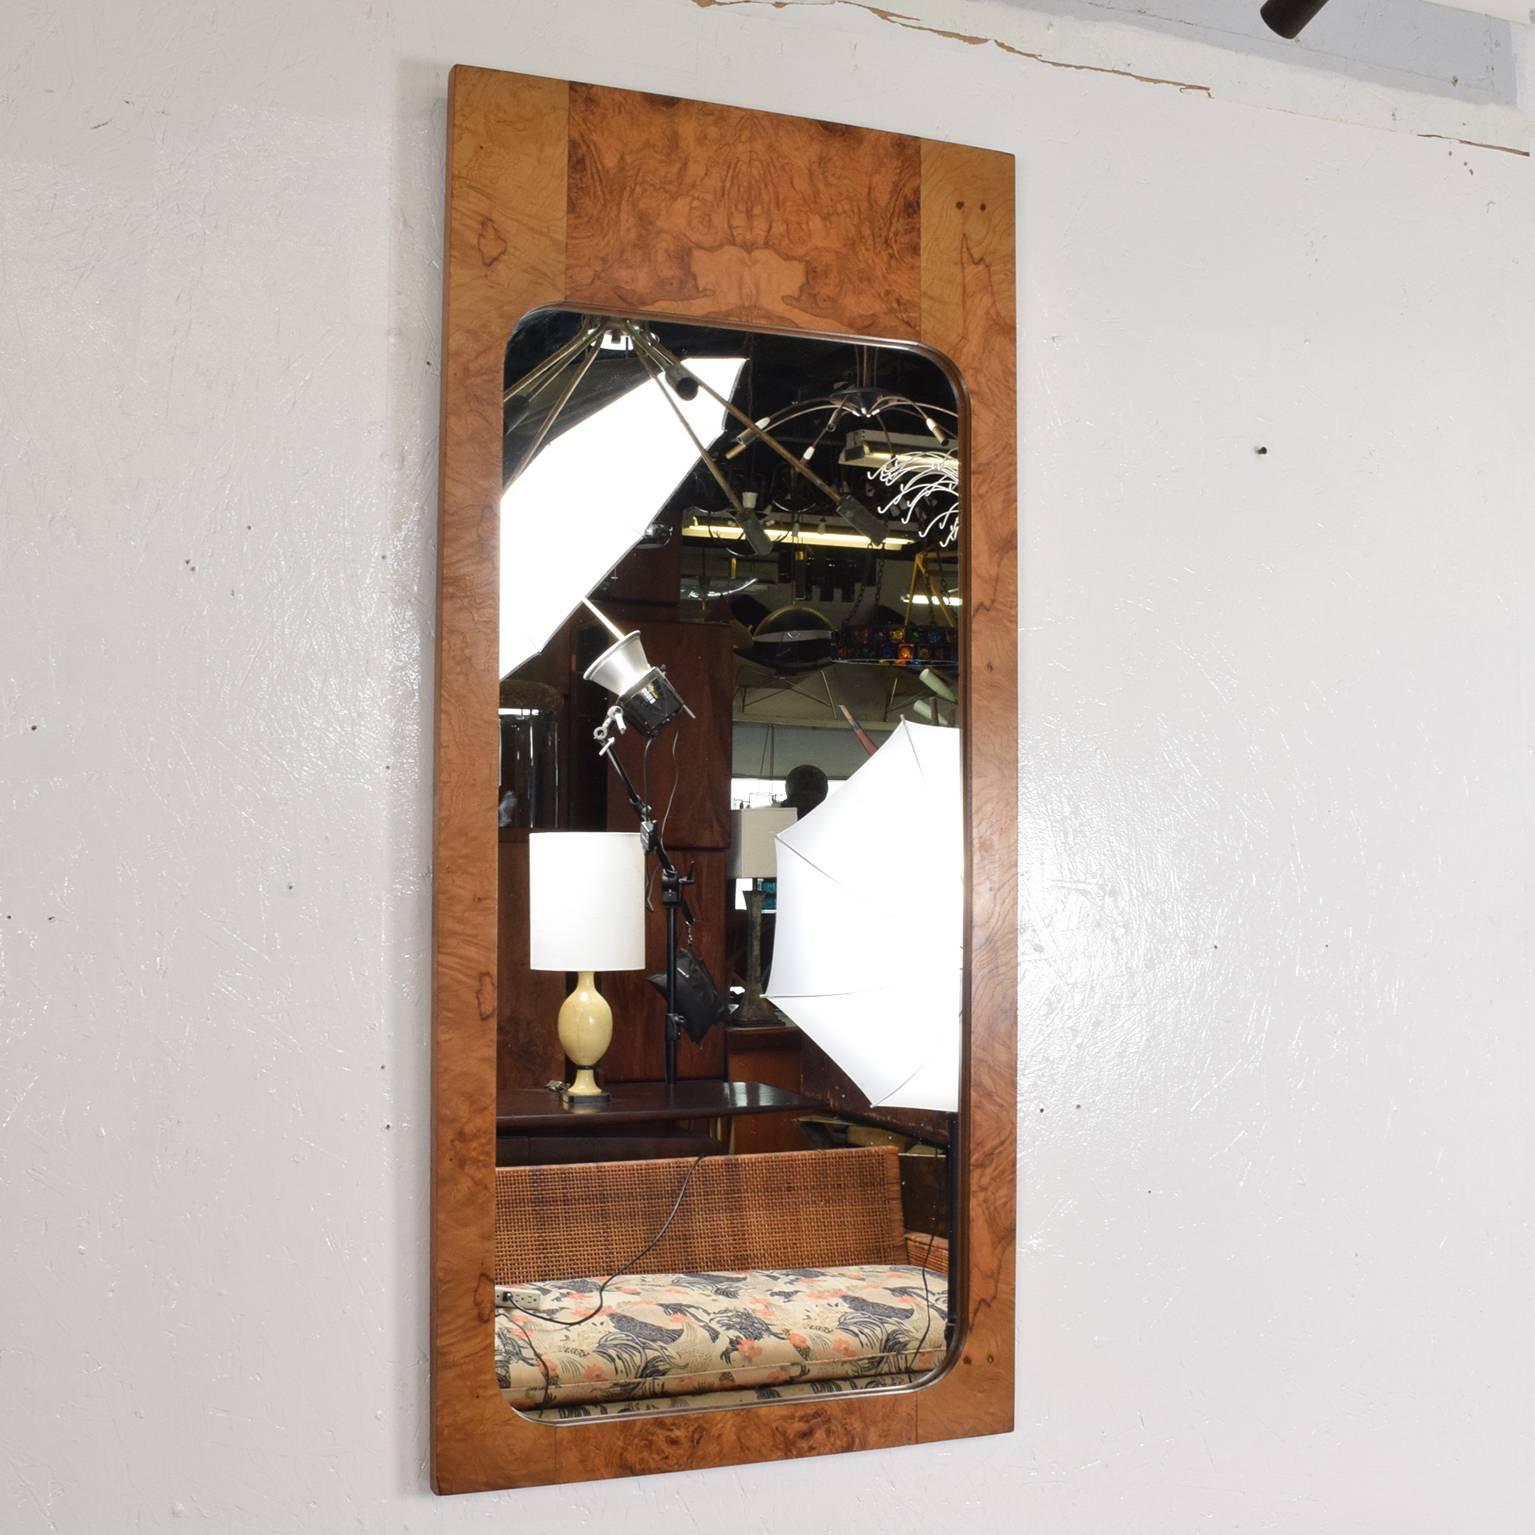 For your consideration, Mid-Century Modern wall mirror in burl wood by Milo Baughman.

The USA circa the 1970s.
Dimensions: 47